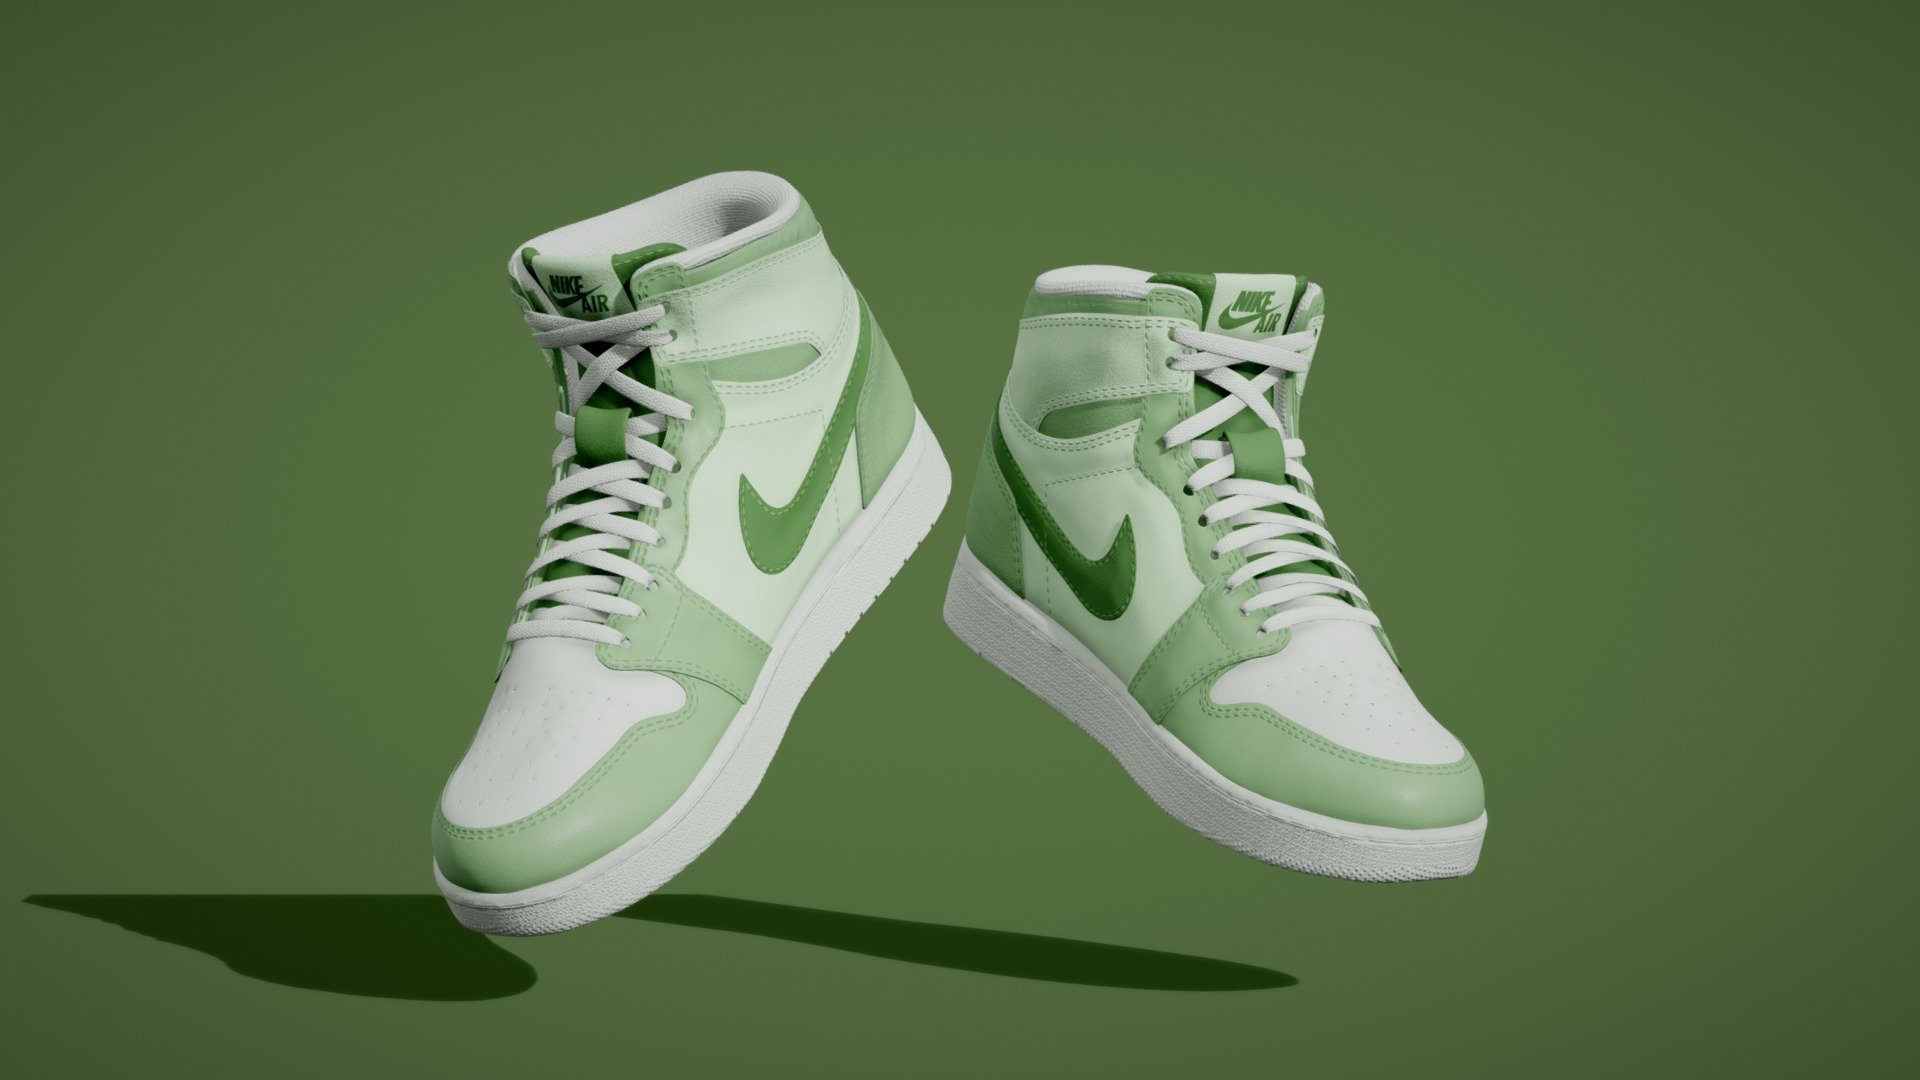 It is a High Quality Air Jordan NIKE Shoes 3d model

Modeling : Modeled with fine Details, Will be perfect for any Cool 3d character Project, Or can be traits of NFT Character

Texture : Textured in High quality 4k texture ( 2 Material - 1 left shoe/2 Right Shoe )

Variants : There are 10 different textures set and this is 10 of 10 Variants.

Feel free to comment for review of this model or any suggestions 3d model